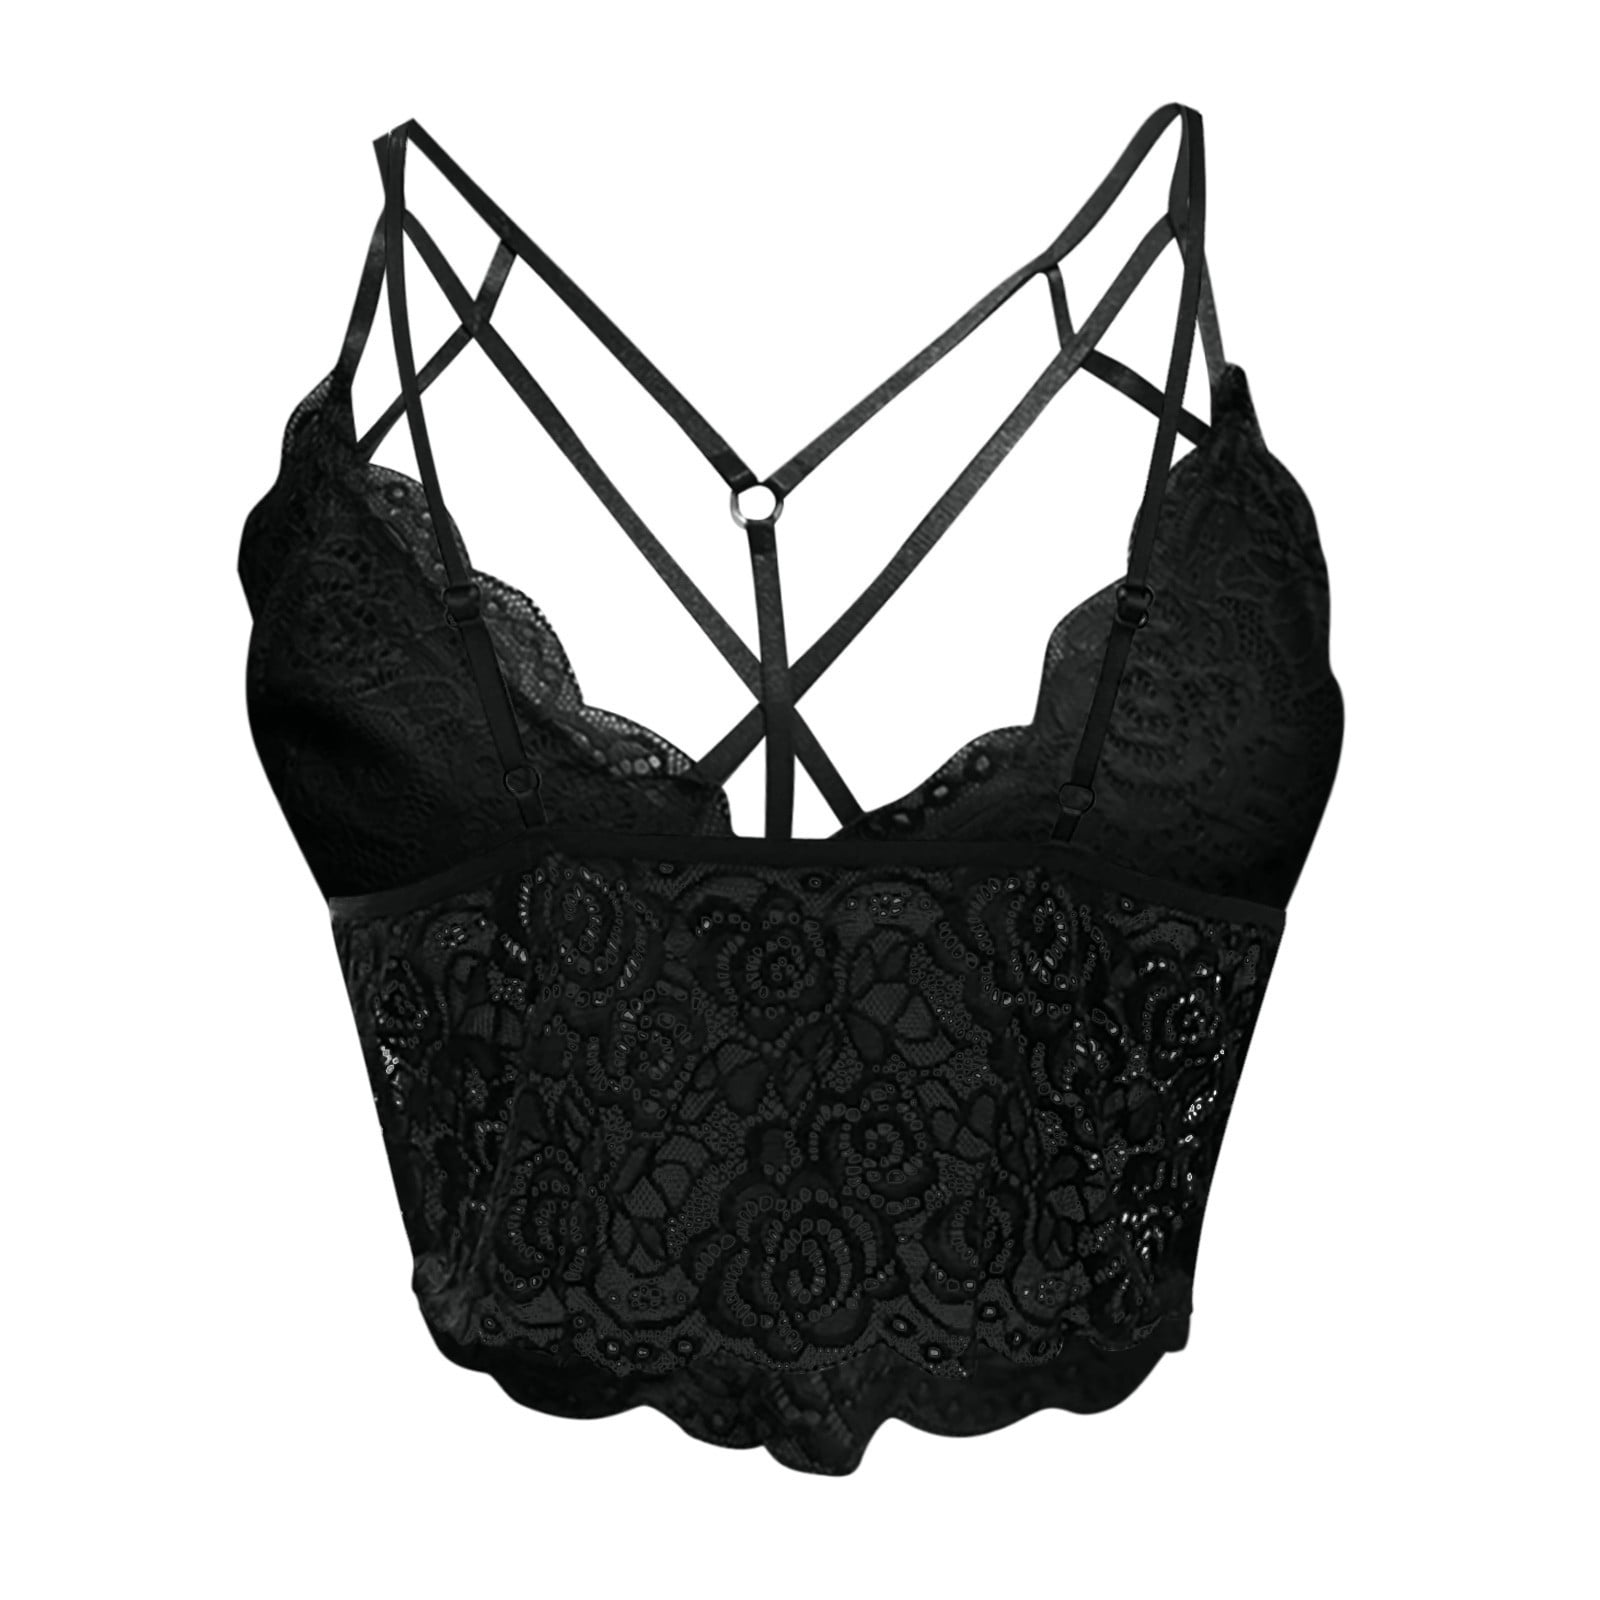 Hfyihgf On Clearance Womens Summer Lace Bra Bustier Mesh Sexy Vintage  Spaghetti Strap Crisscross V-Neck Corset Going Out Party Crop Top(Black,XS)  